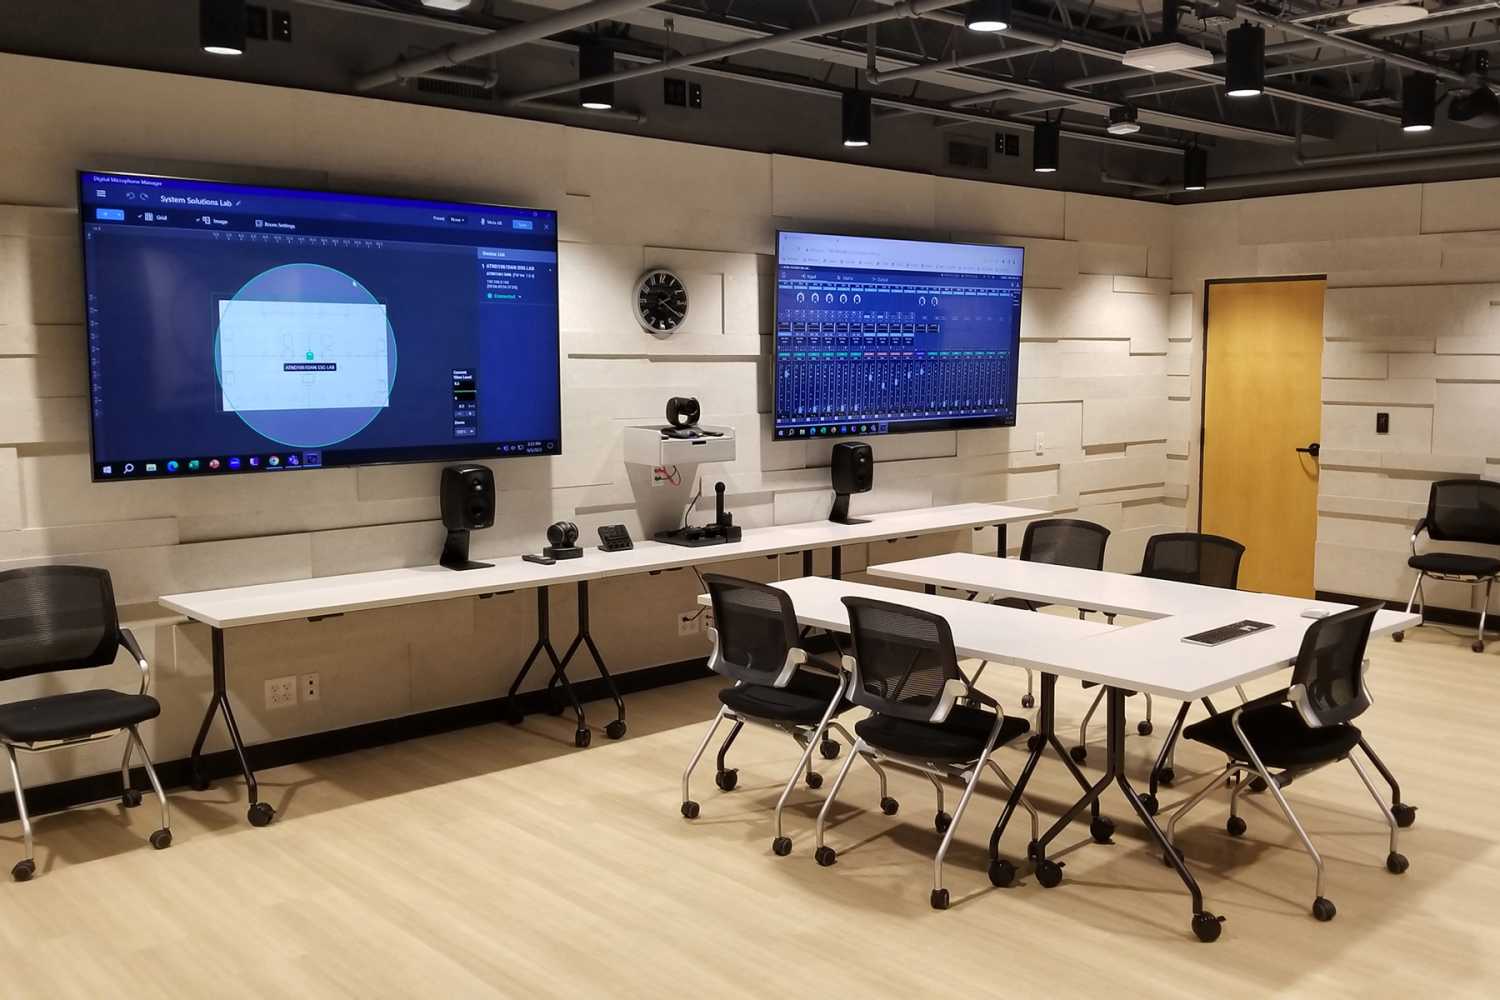 Integration with Audio-Technica’s technology partners is a key part of this laboratory